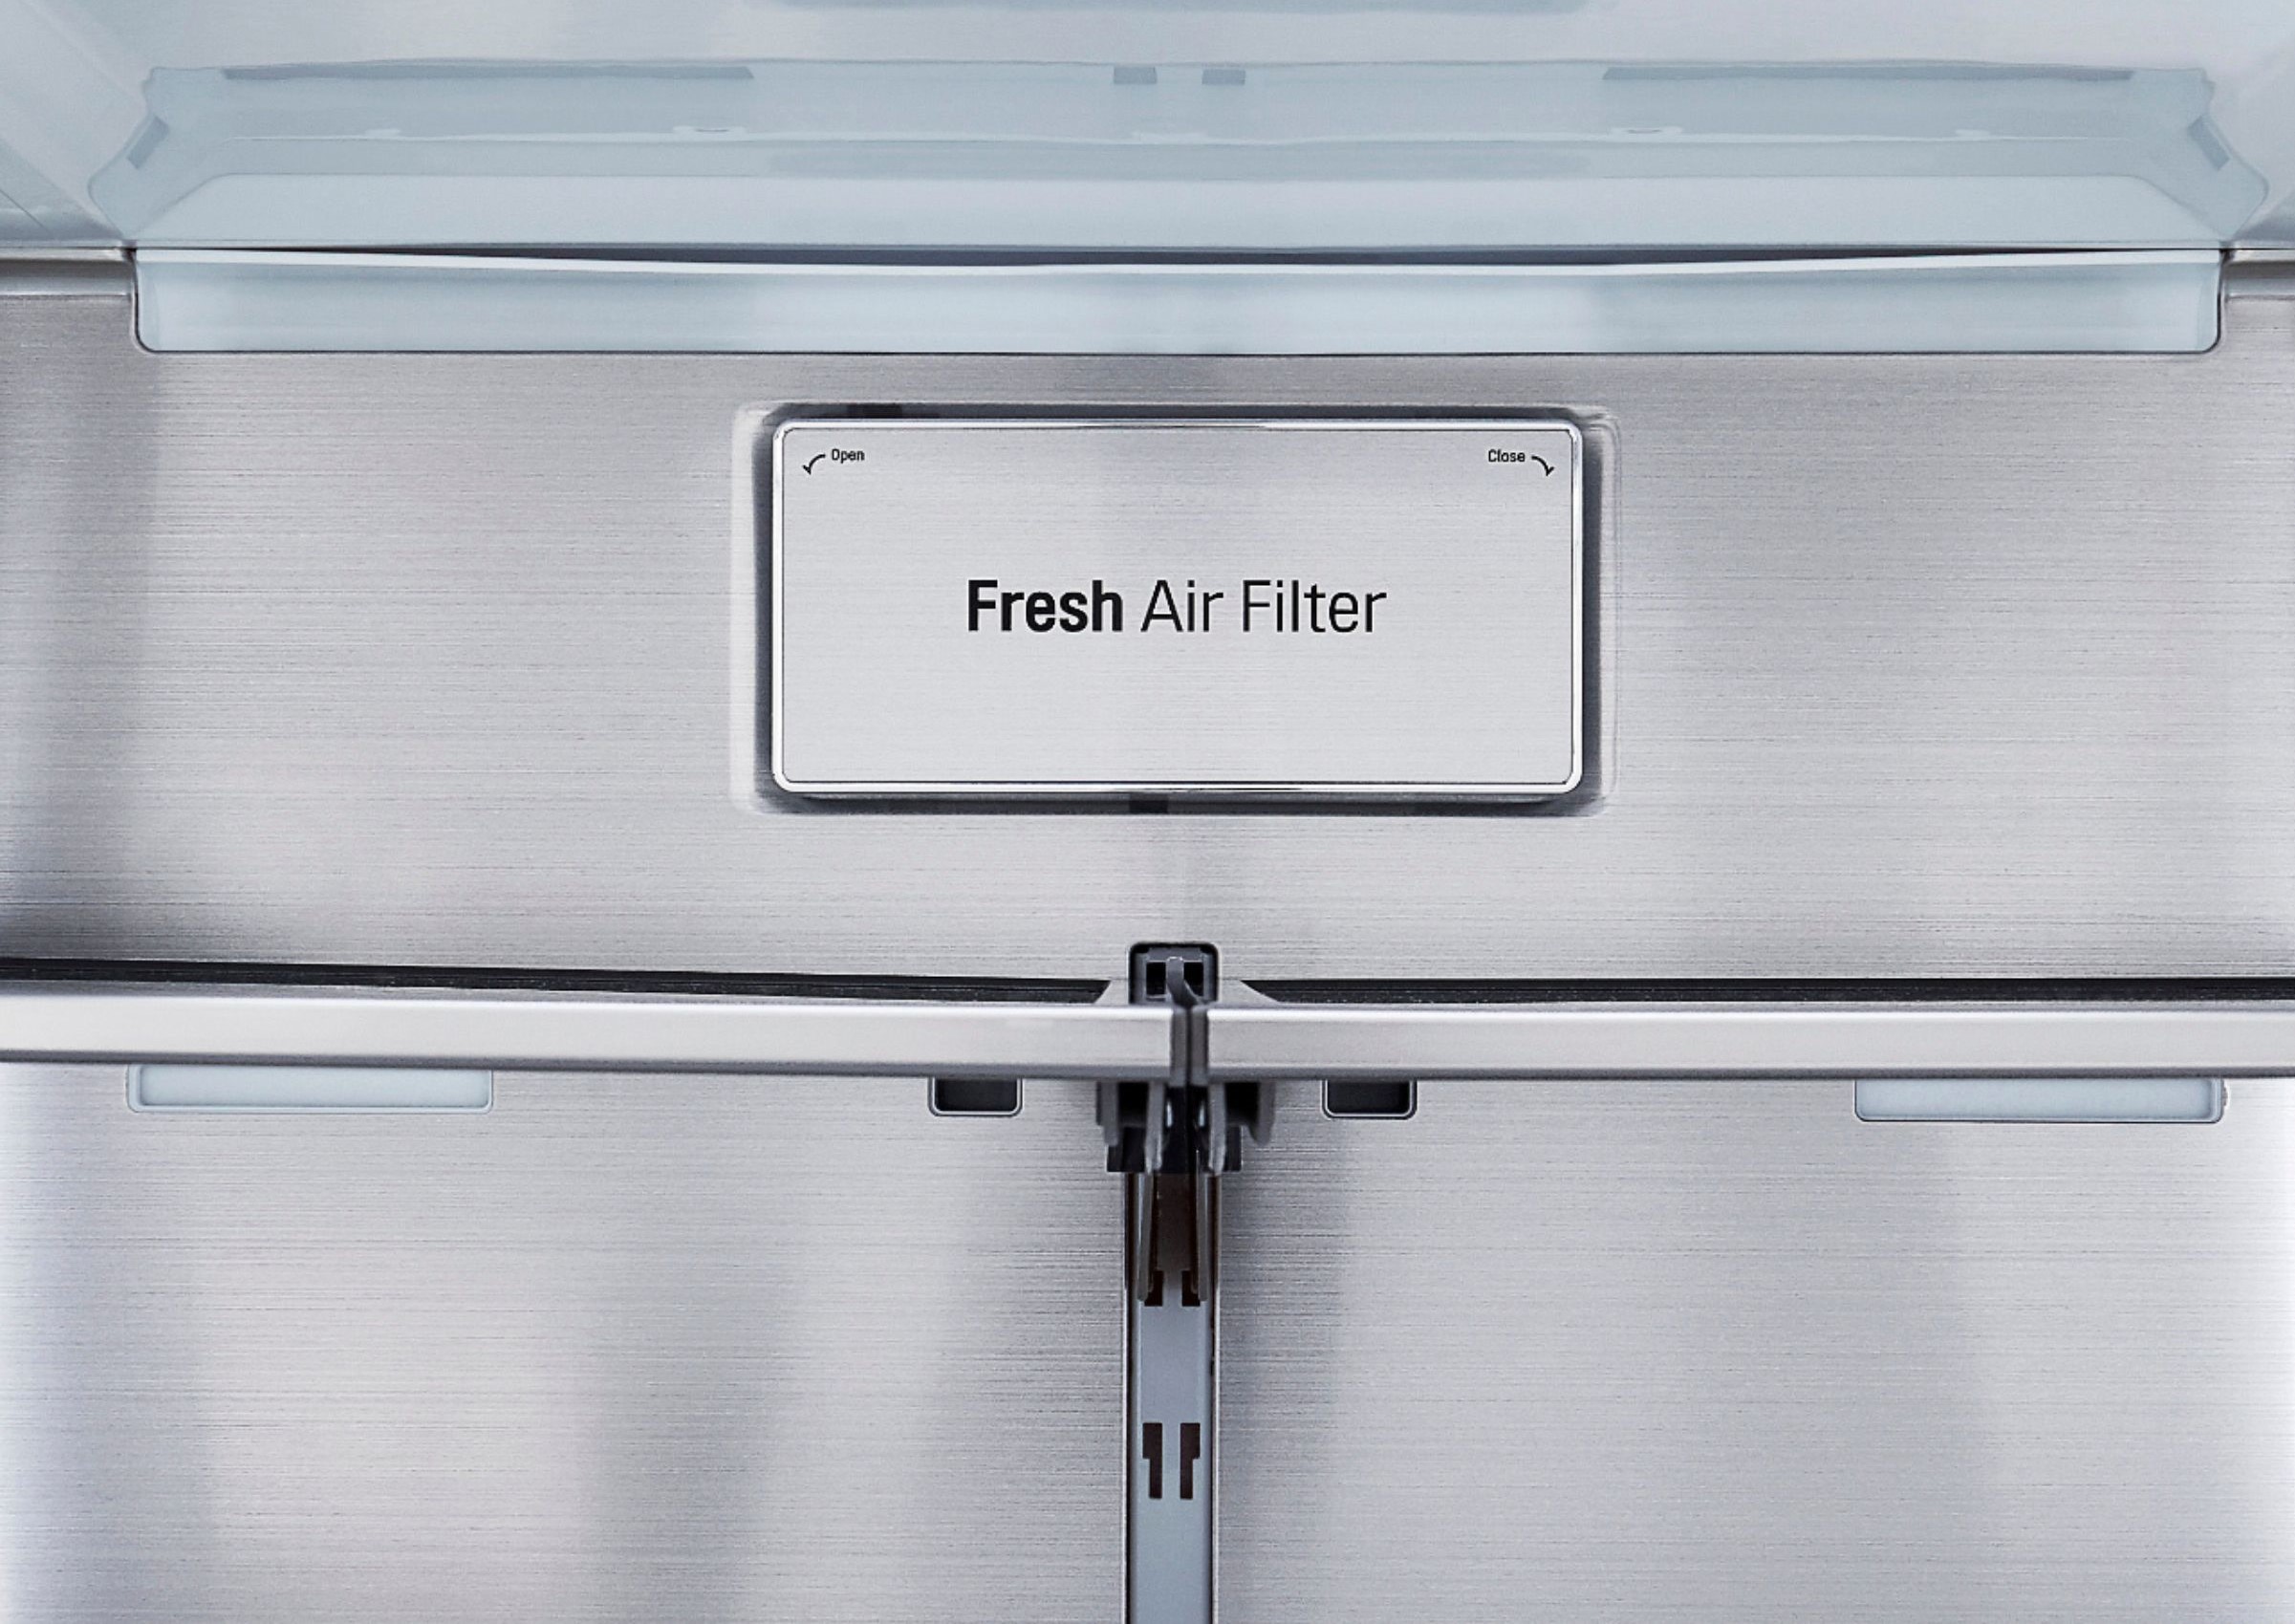 How To Change Air Filter On Lg Refrigerator